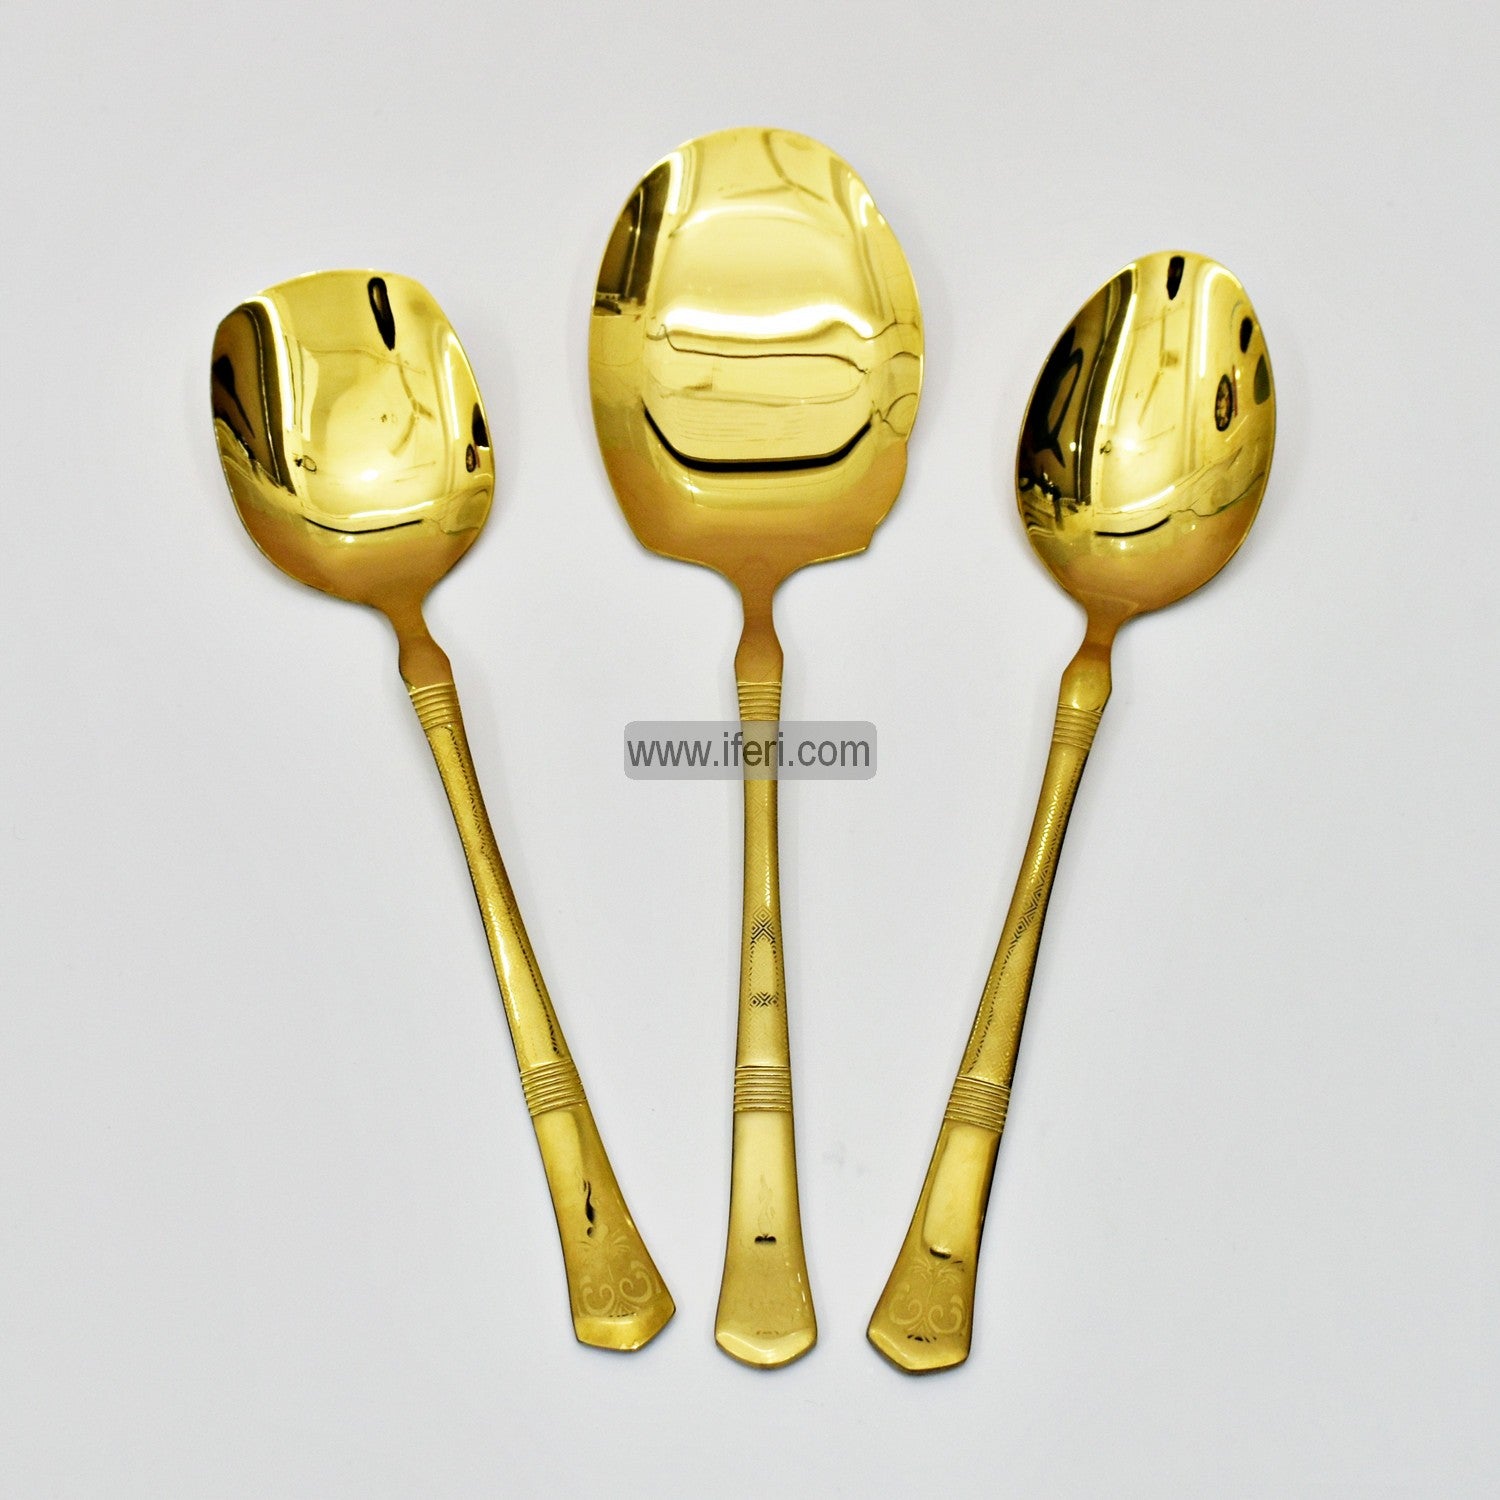 3 Pcs Stainless Steel Serving Spoon Set TB1228